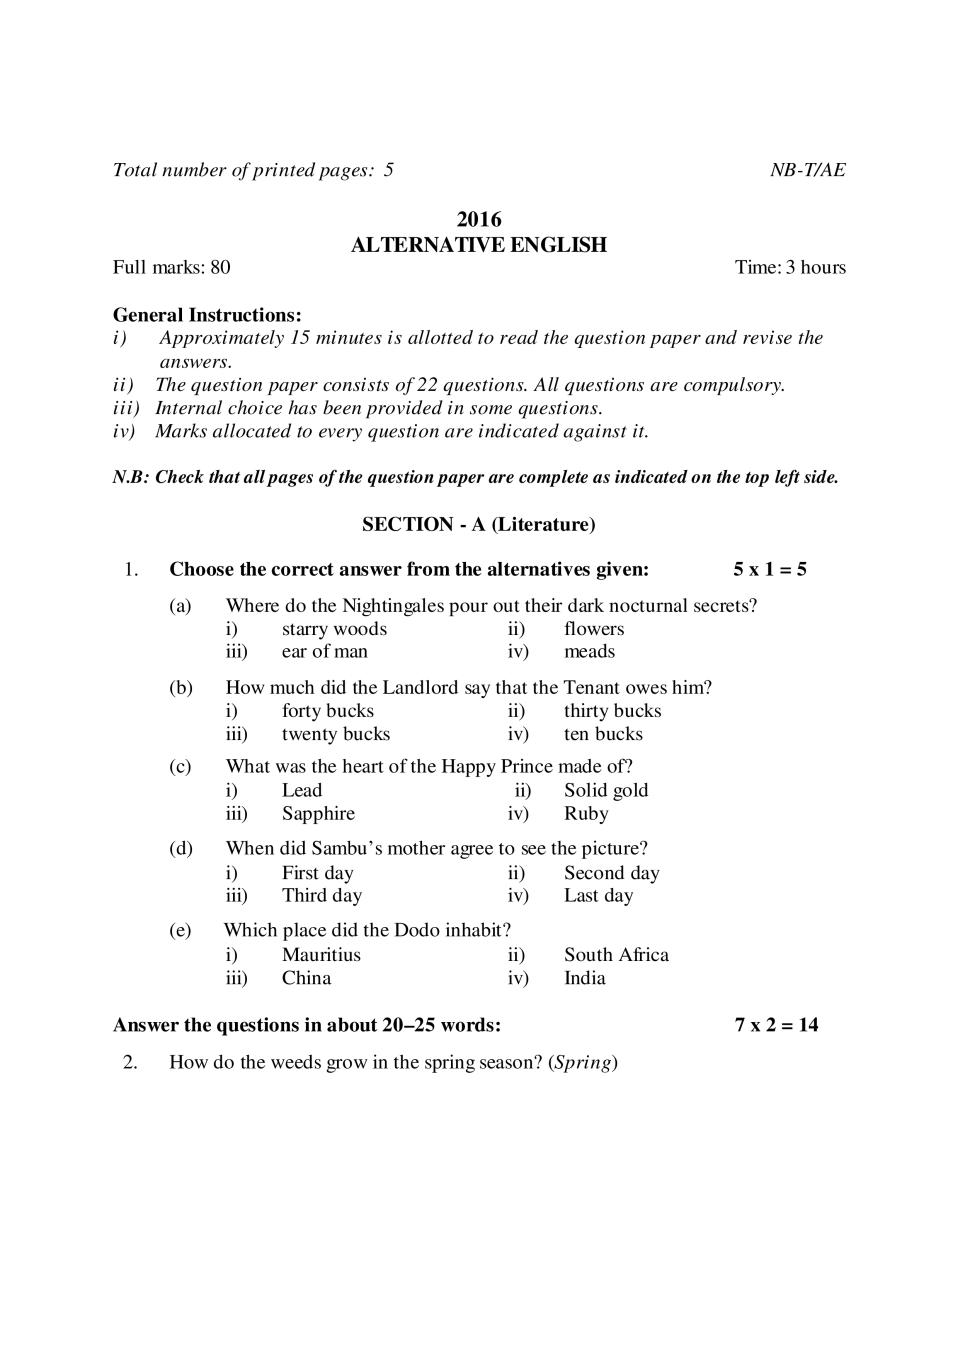 NBSE Class 10 Question Paper 2016 for AlternativeEnglish - Page 1